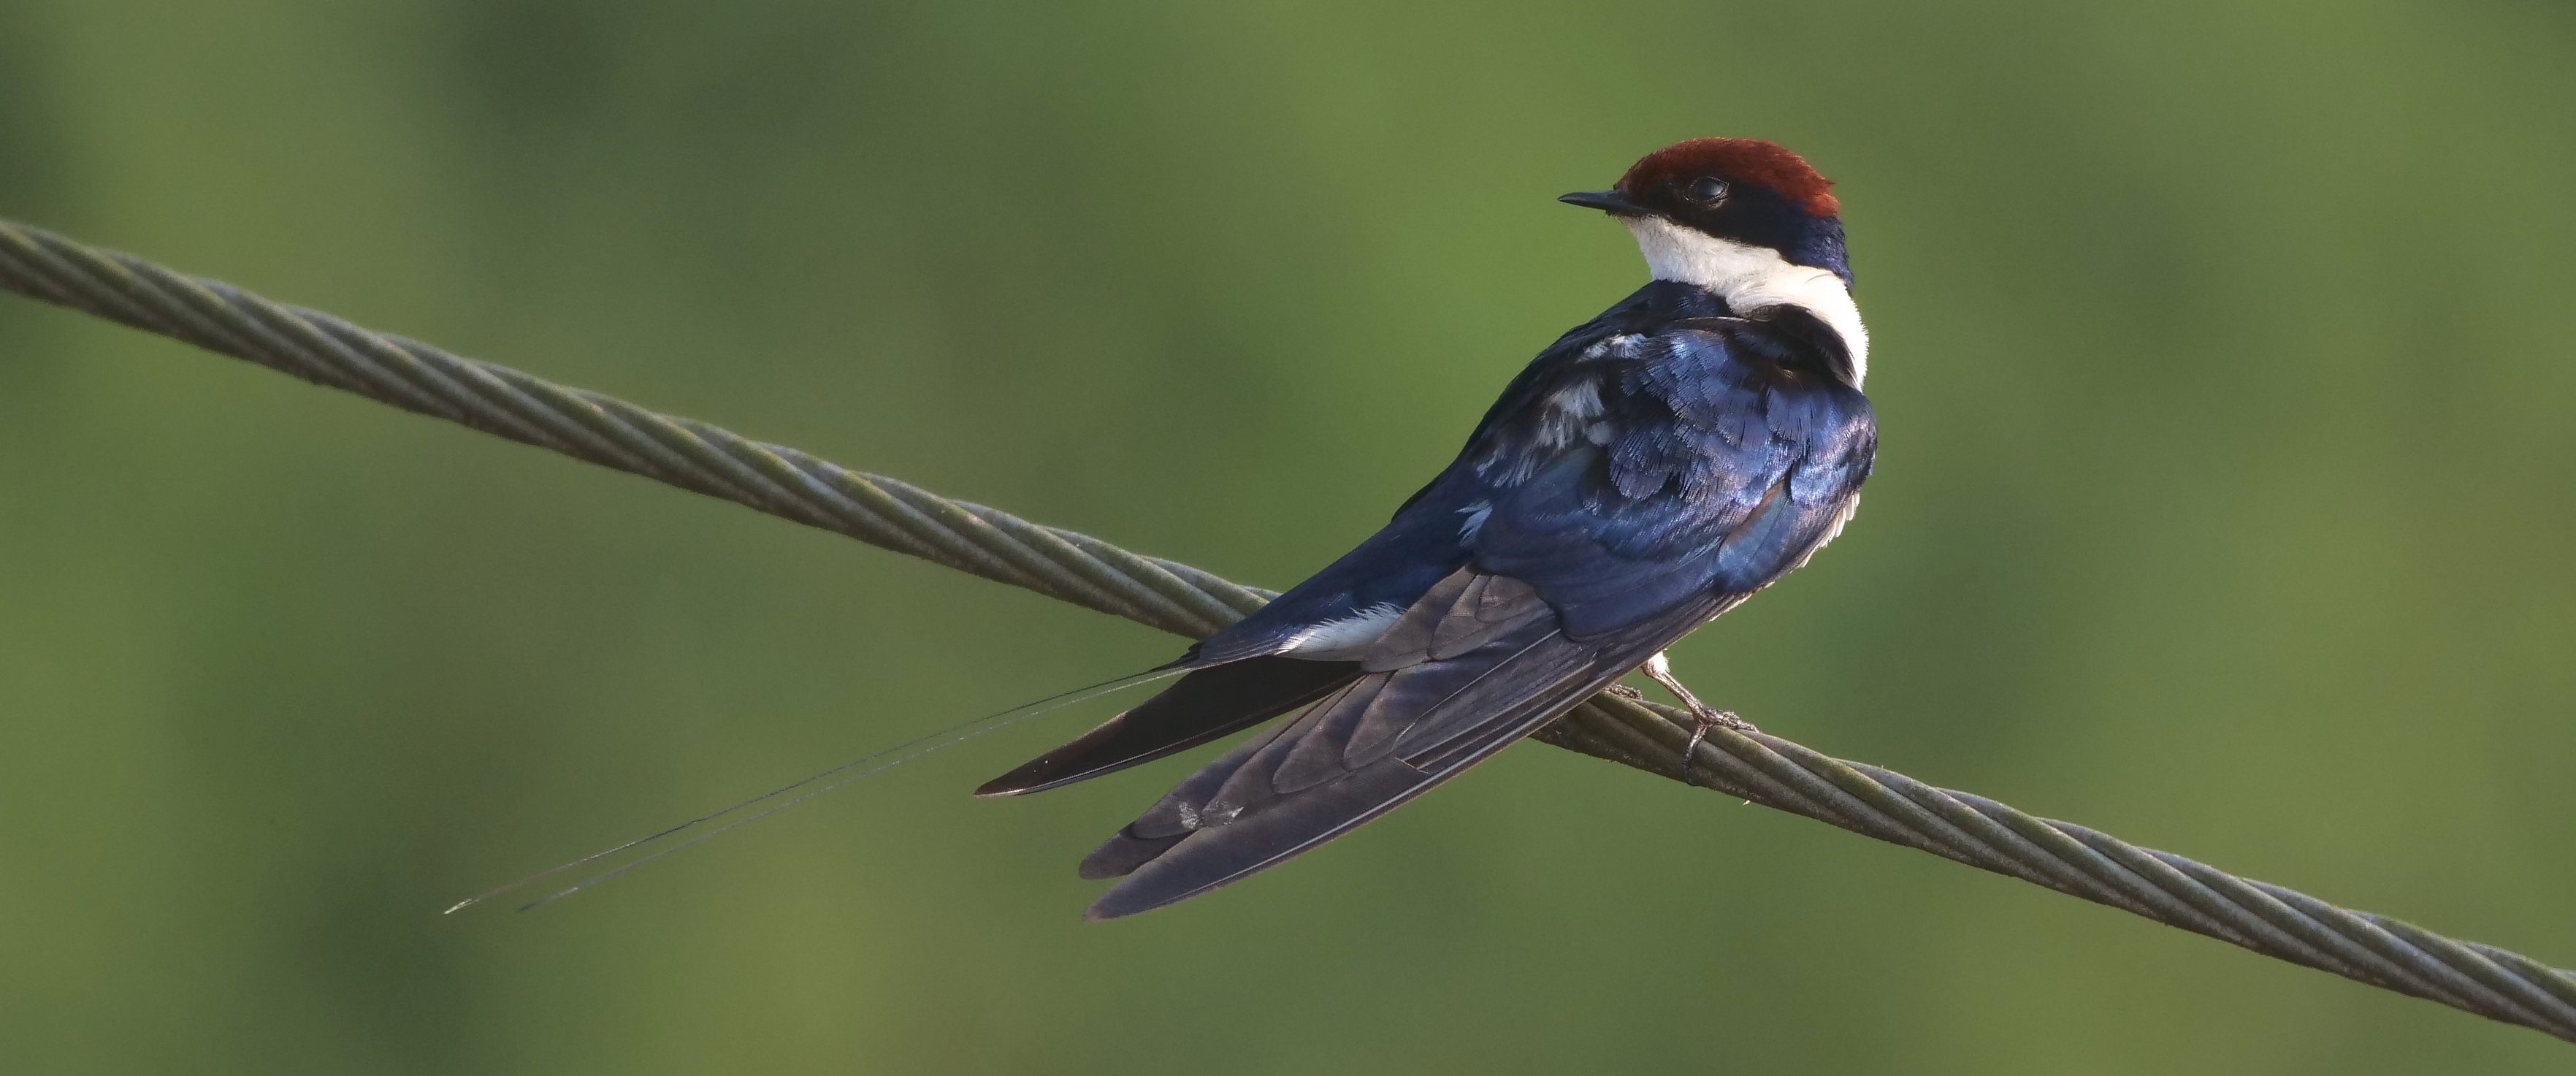 Wire-tailed Swallow.jpg